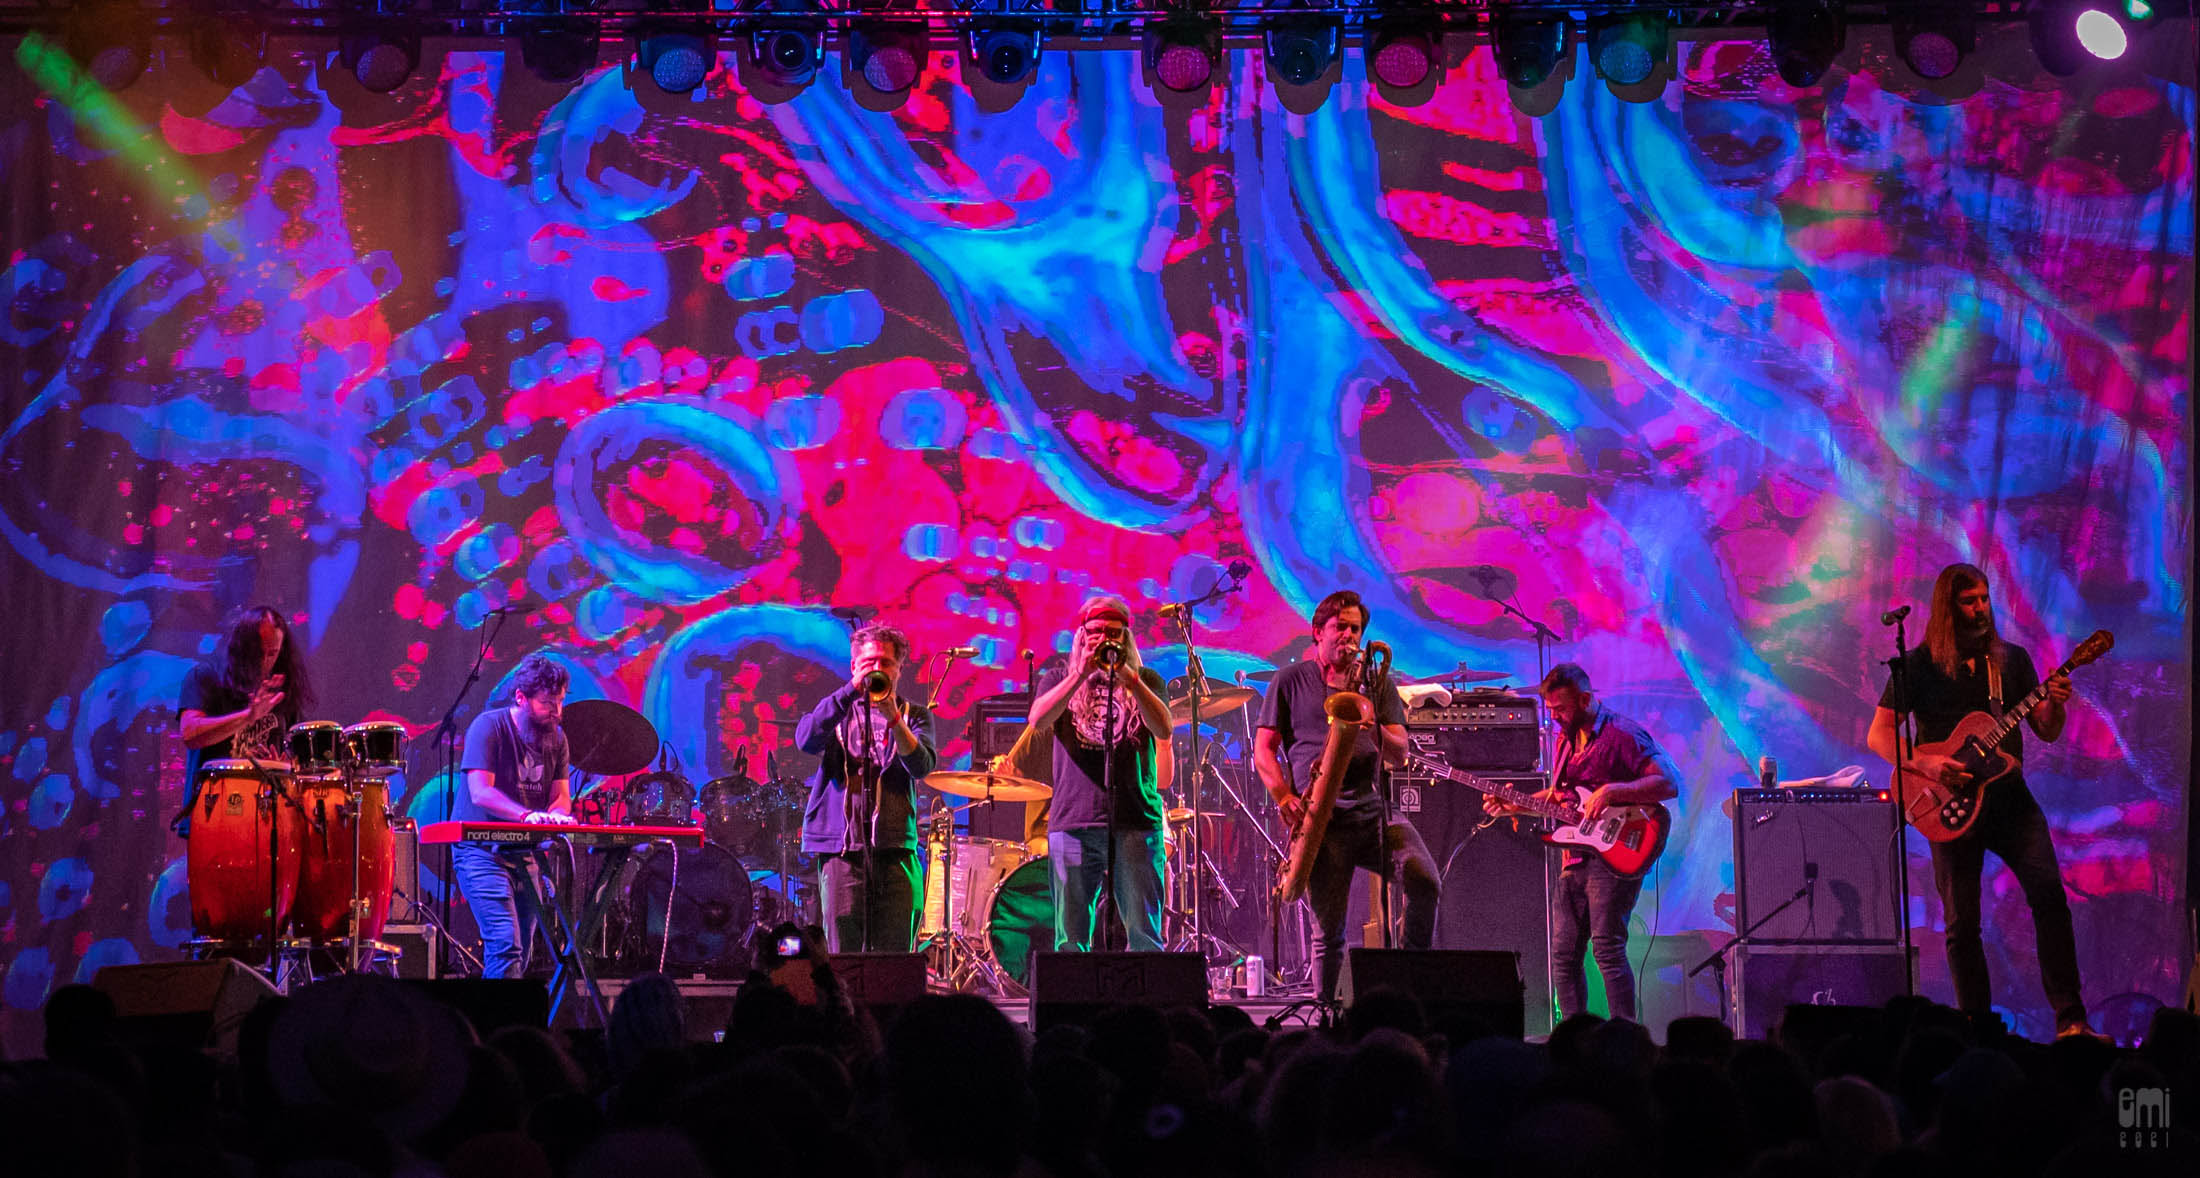 20211113 The Budos Band with Mad Alchemy Liquid Light Show at Desert Daze 2021, photo by emi